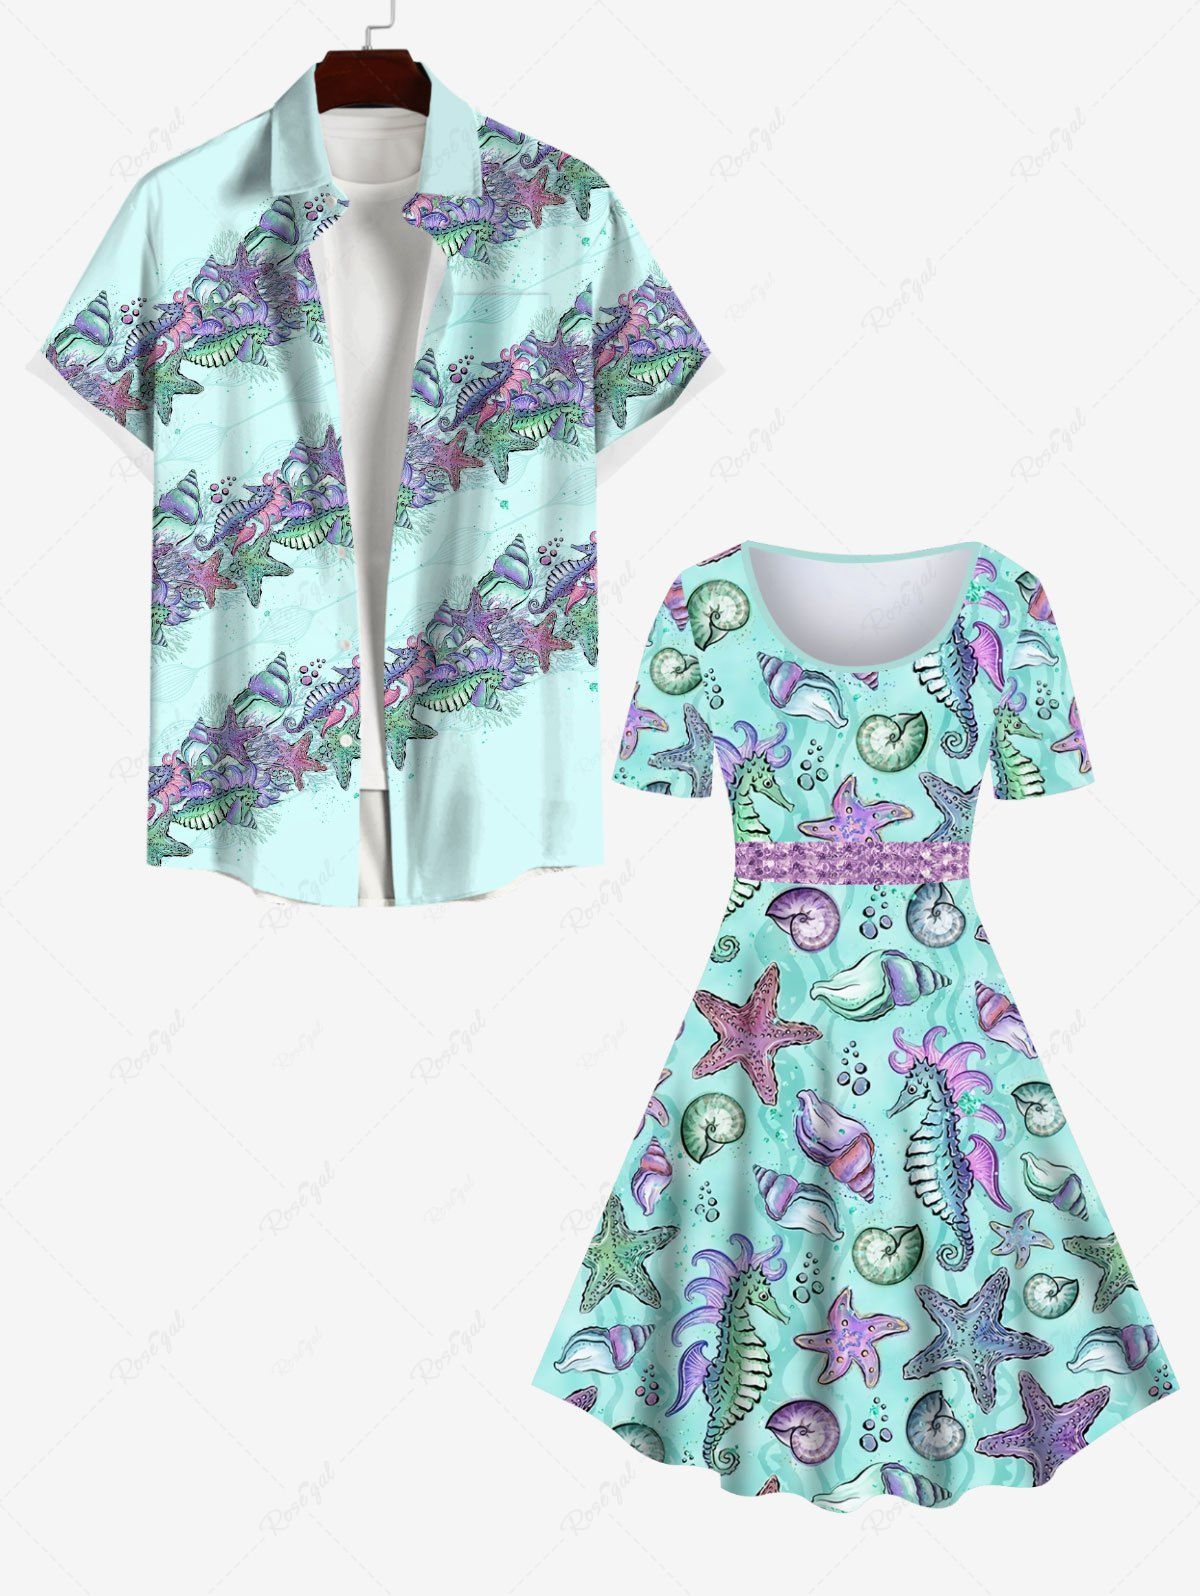 Shops Marine Life Print Plus Size Matching Hawaii Beach Outfit for Couples  